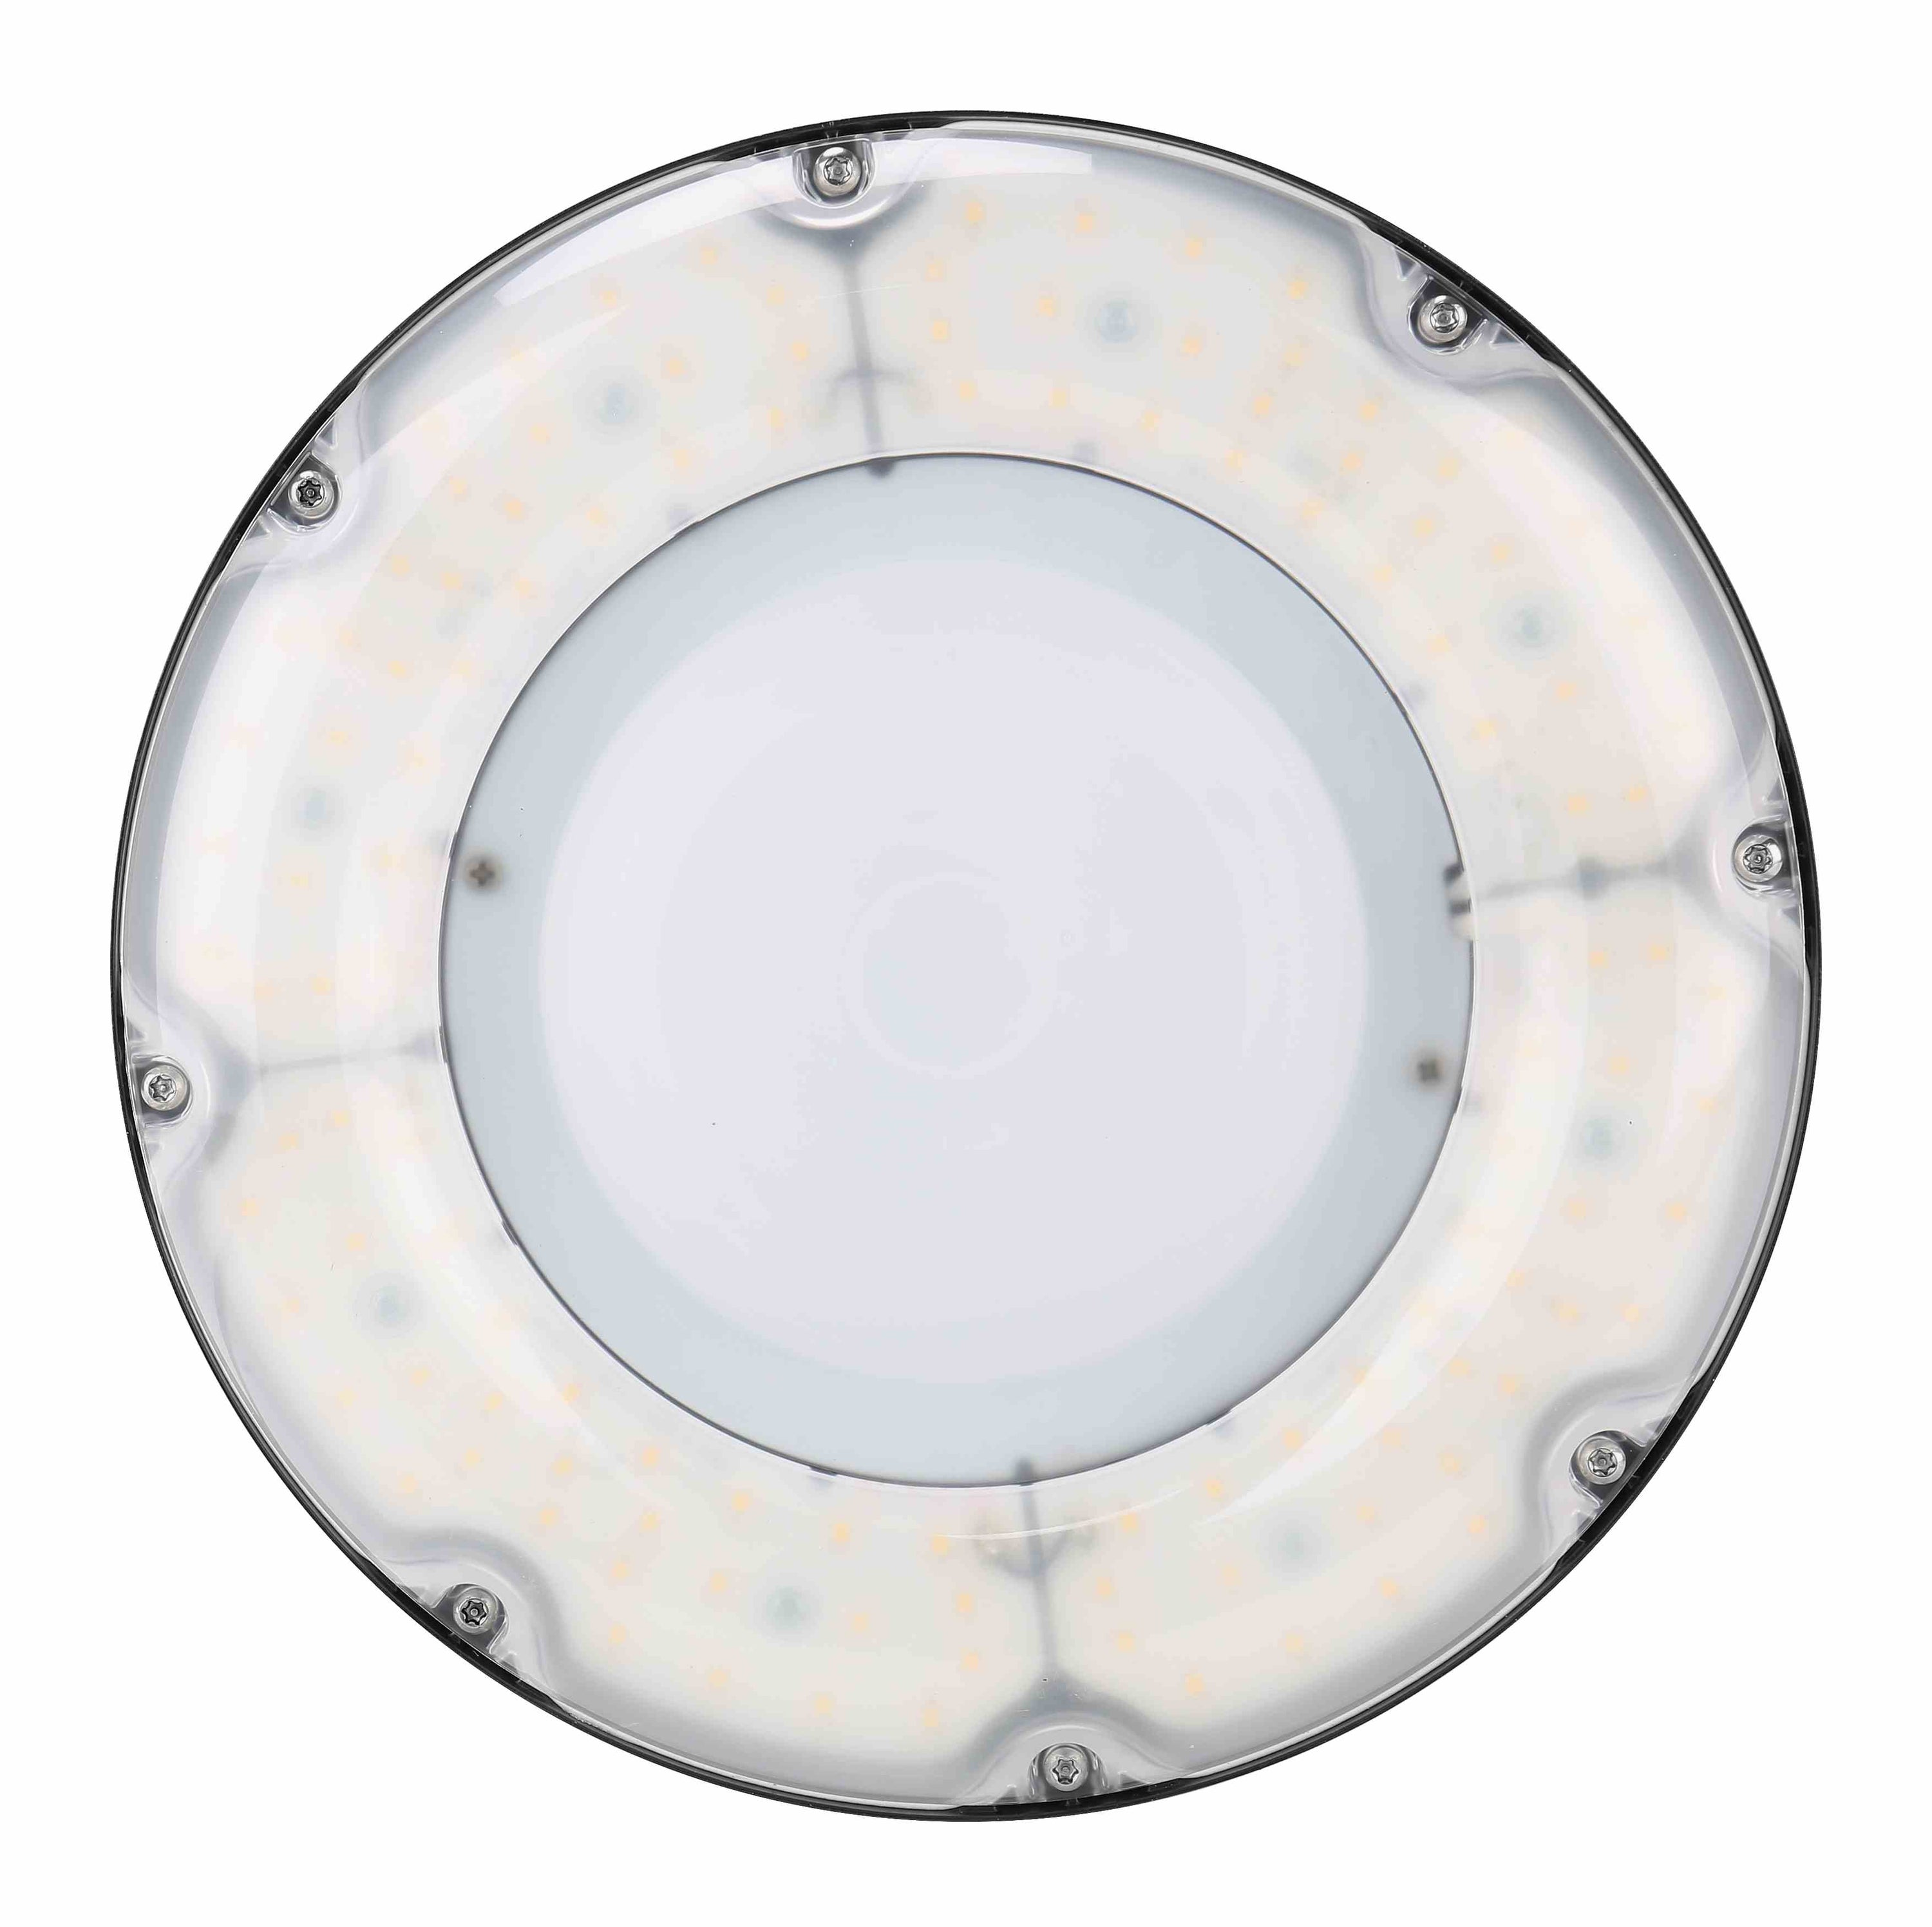 100W Round UFO LED High Bay Light 120-277VAC 5000K Frosted Lens CCT and Power Adjustable - Black